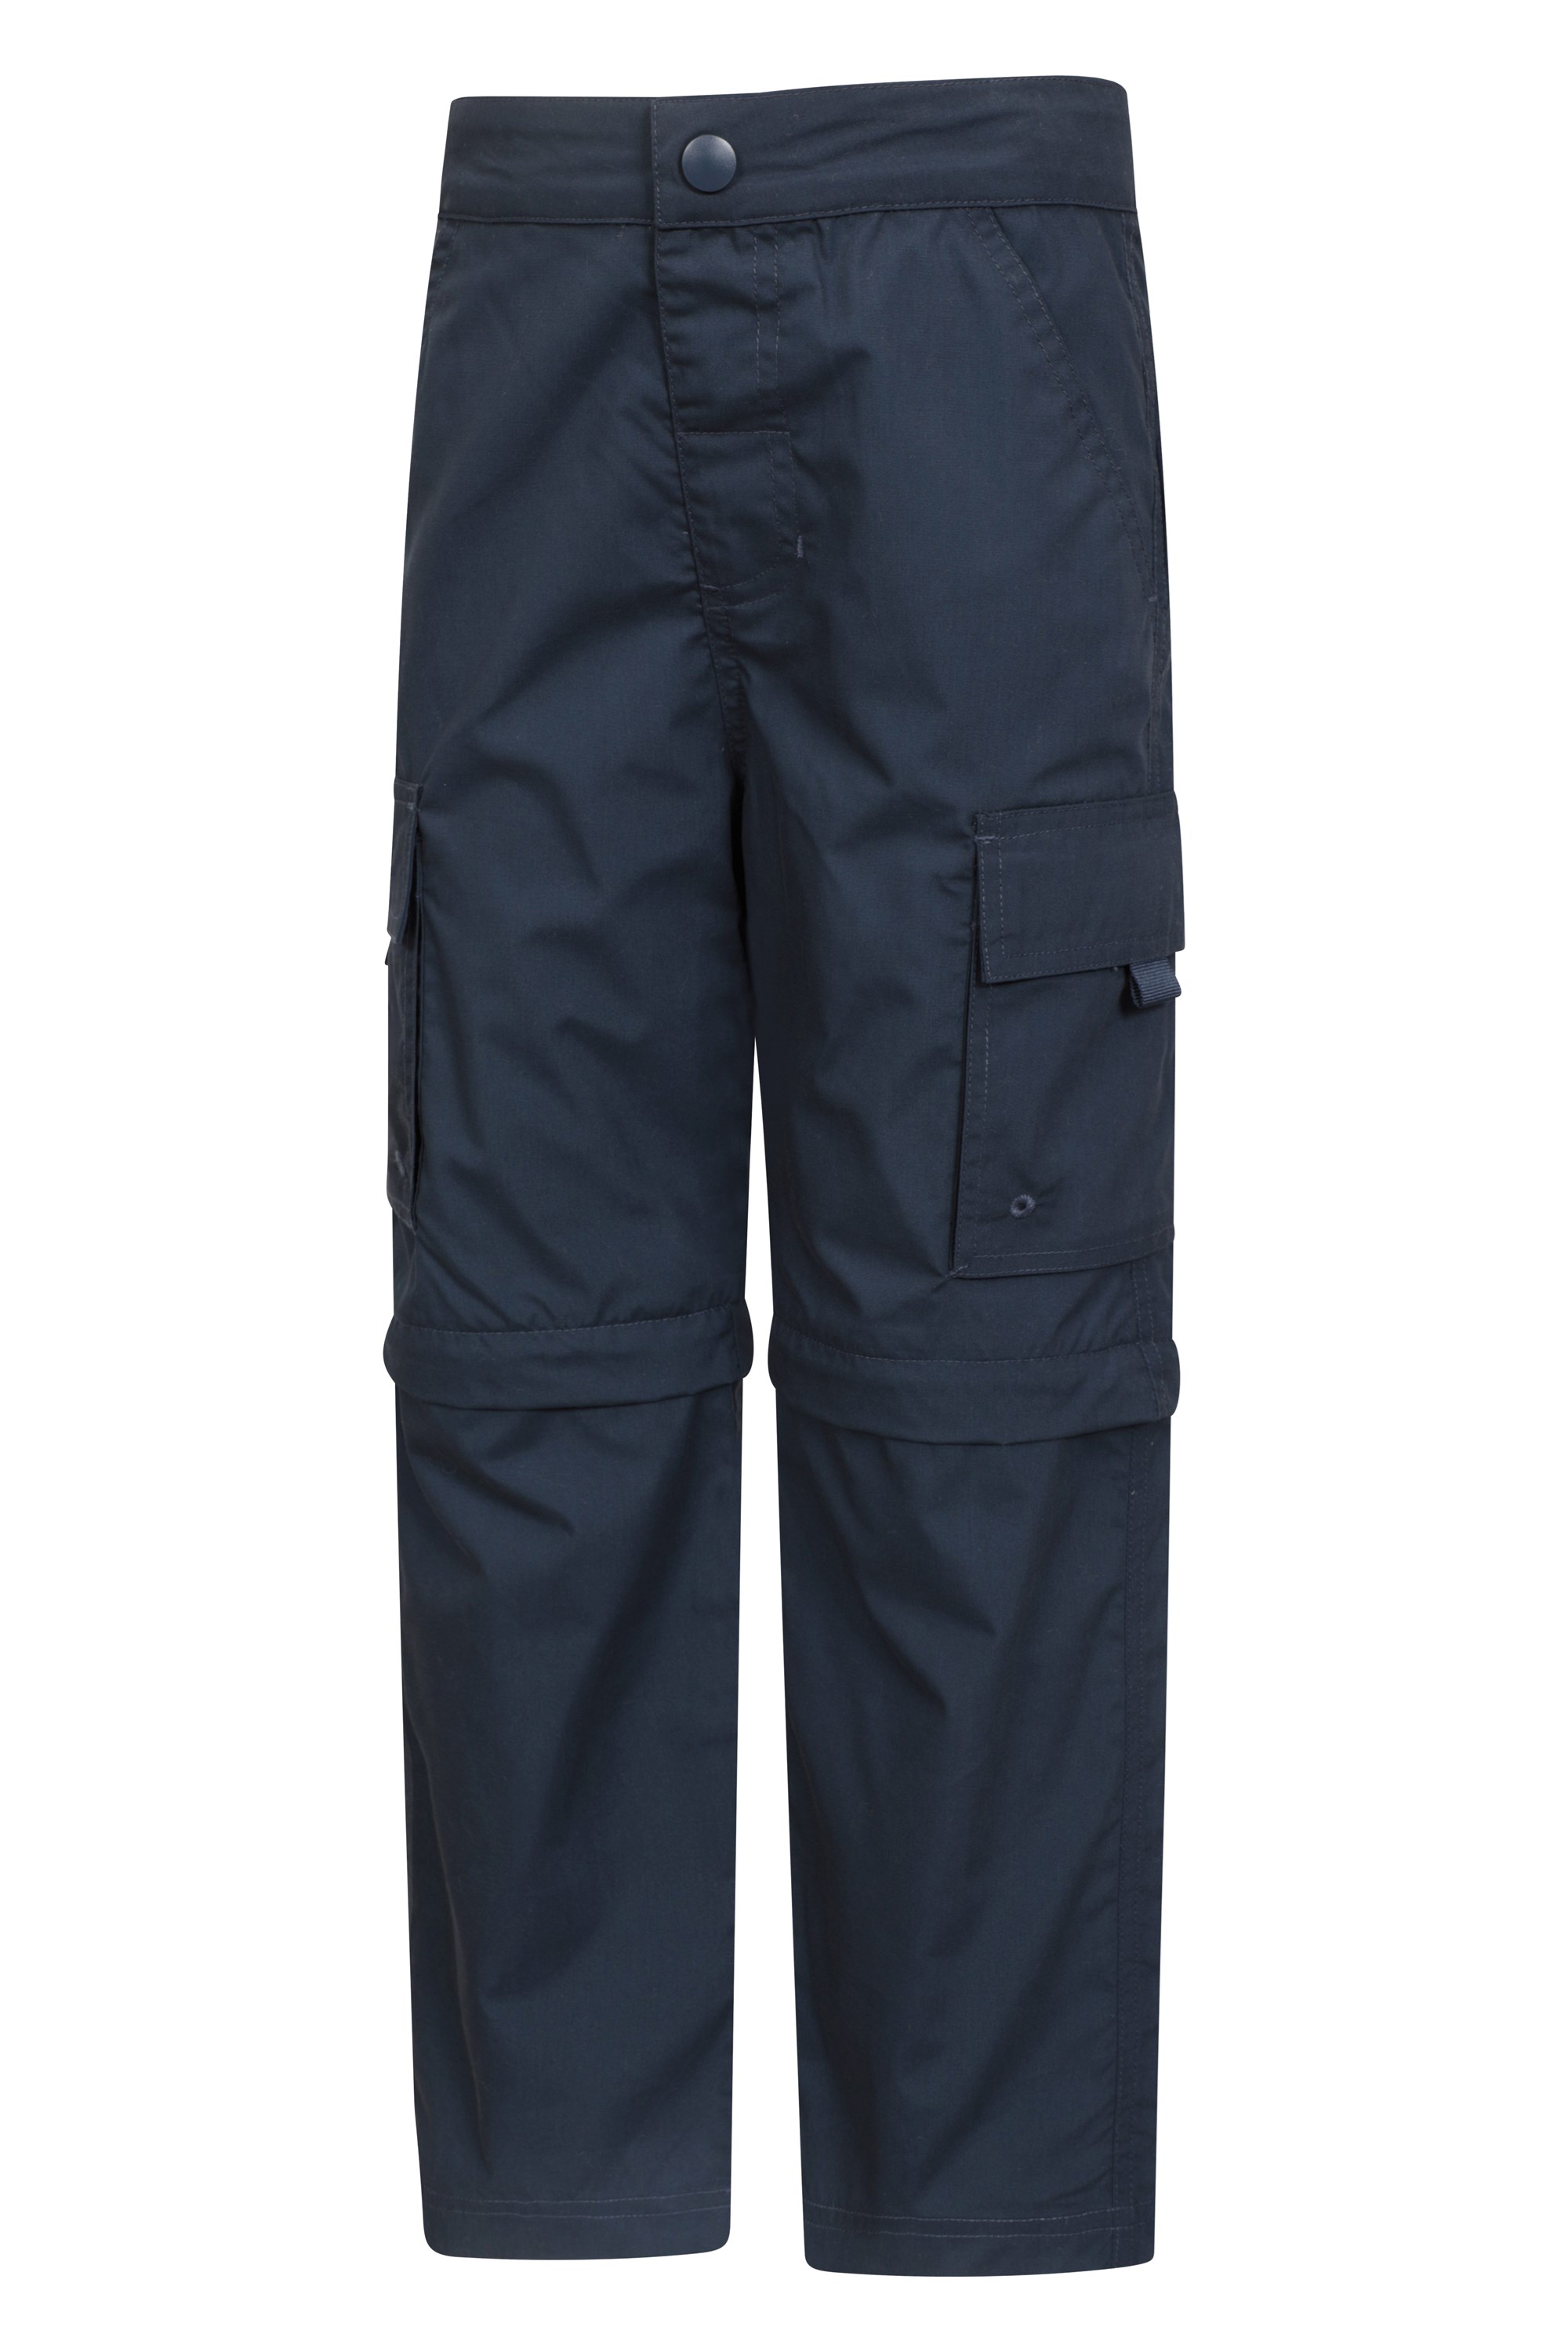 Mountain Warehouse Mountain Warehouse Kids Pull On Trouser Junior Stretch Cuff Cotton Drawcord Pant 